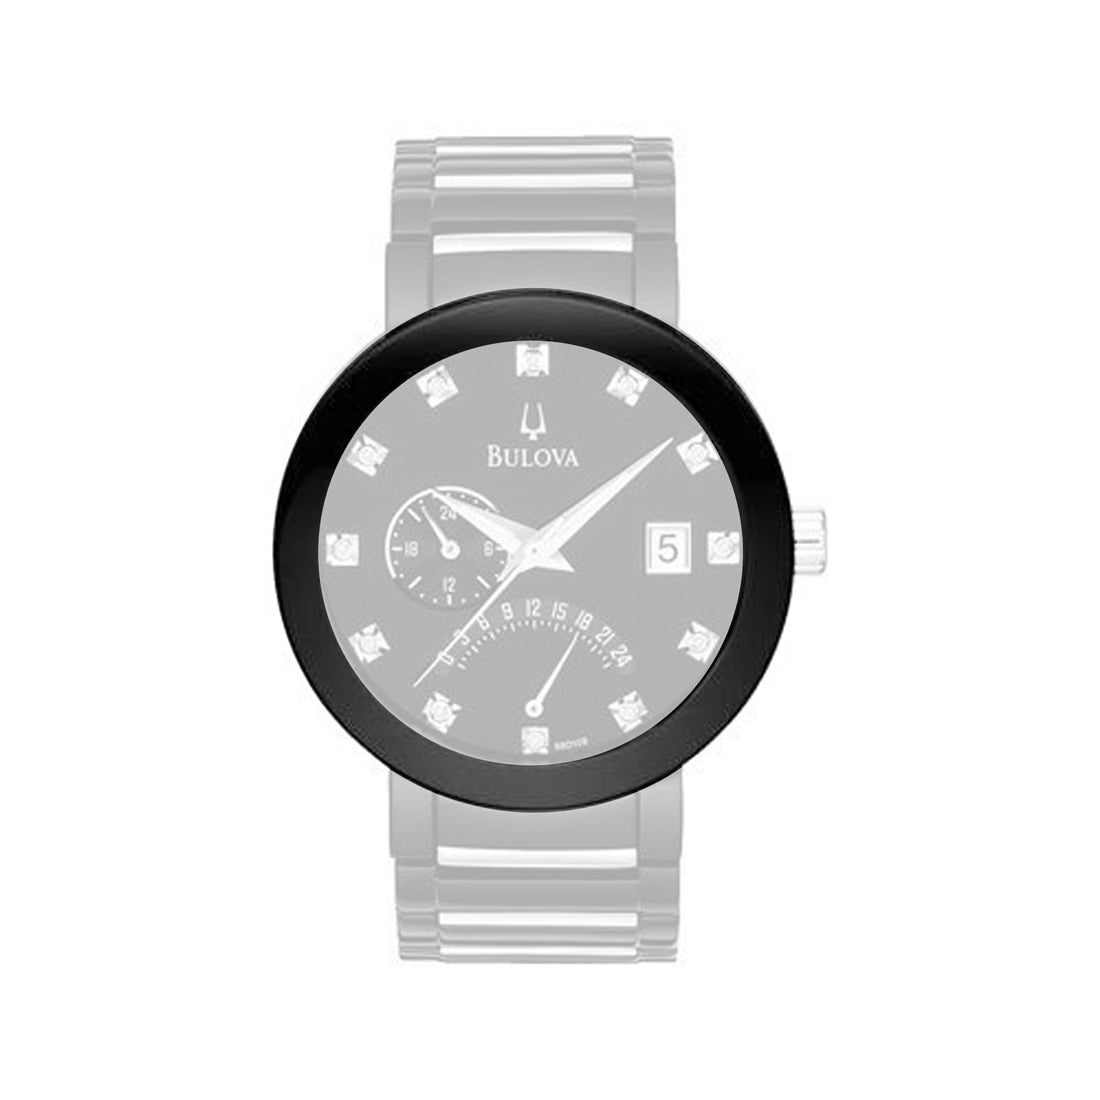 Watch Crystals for Bulova C9691226